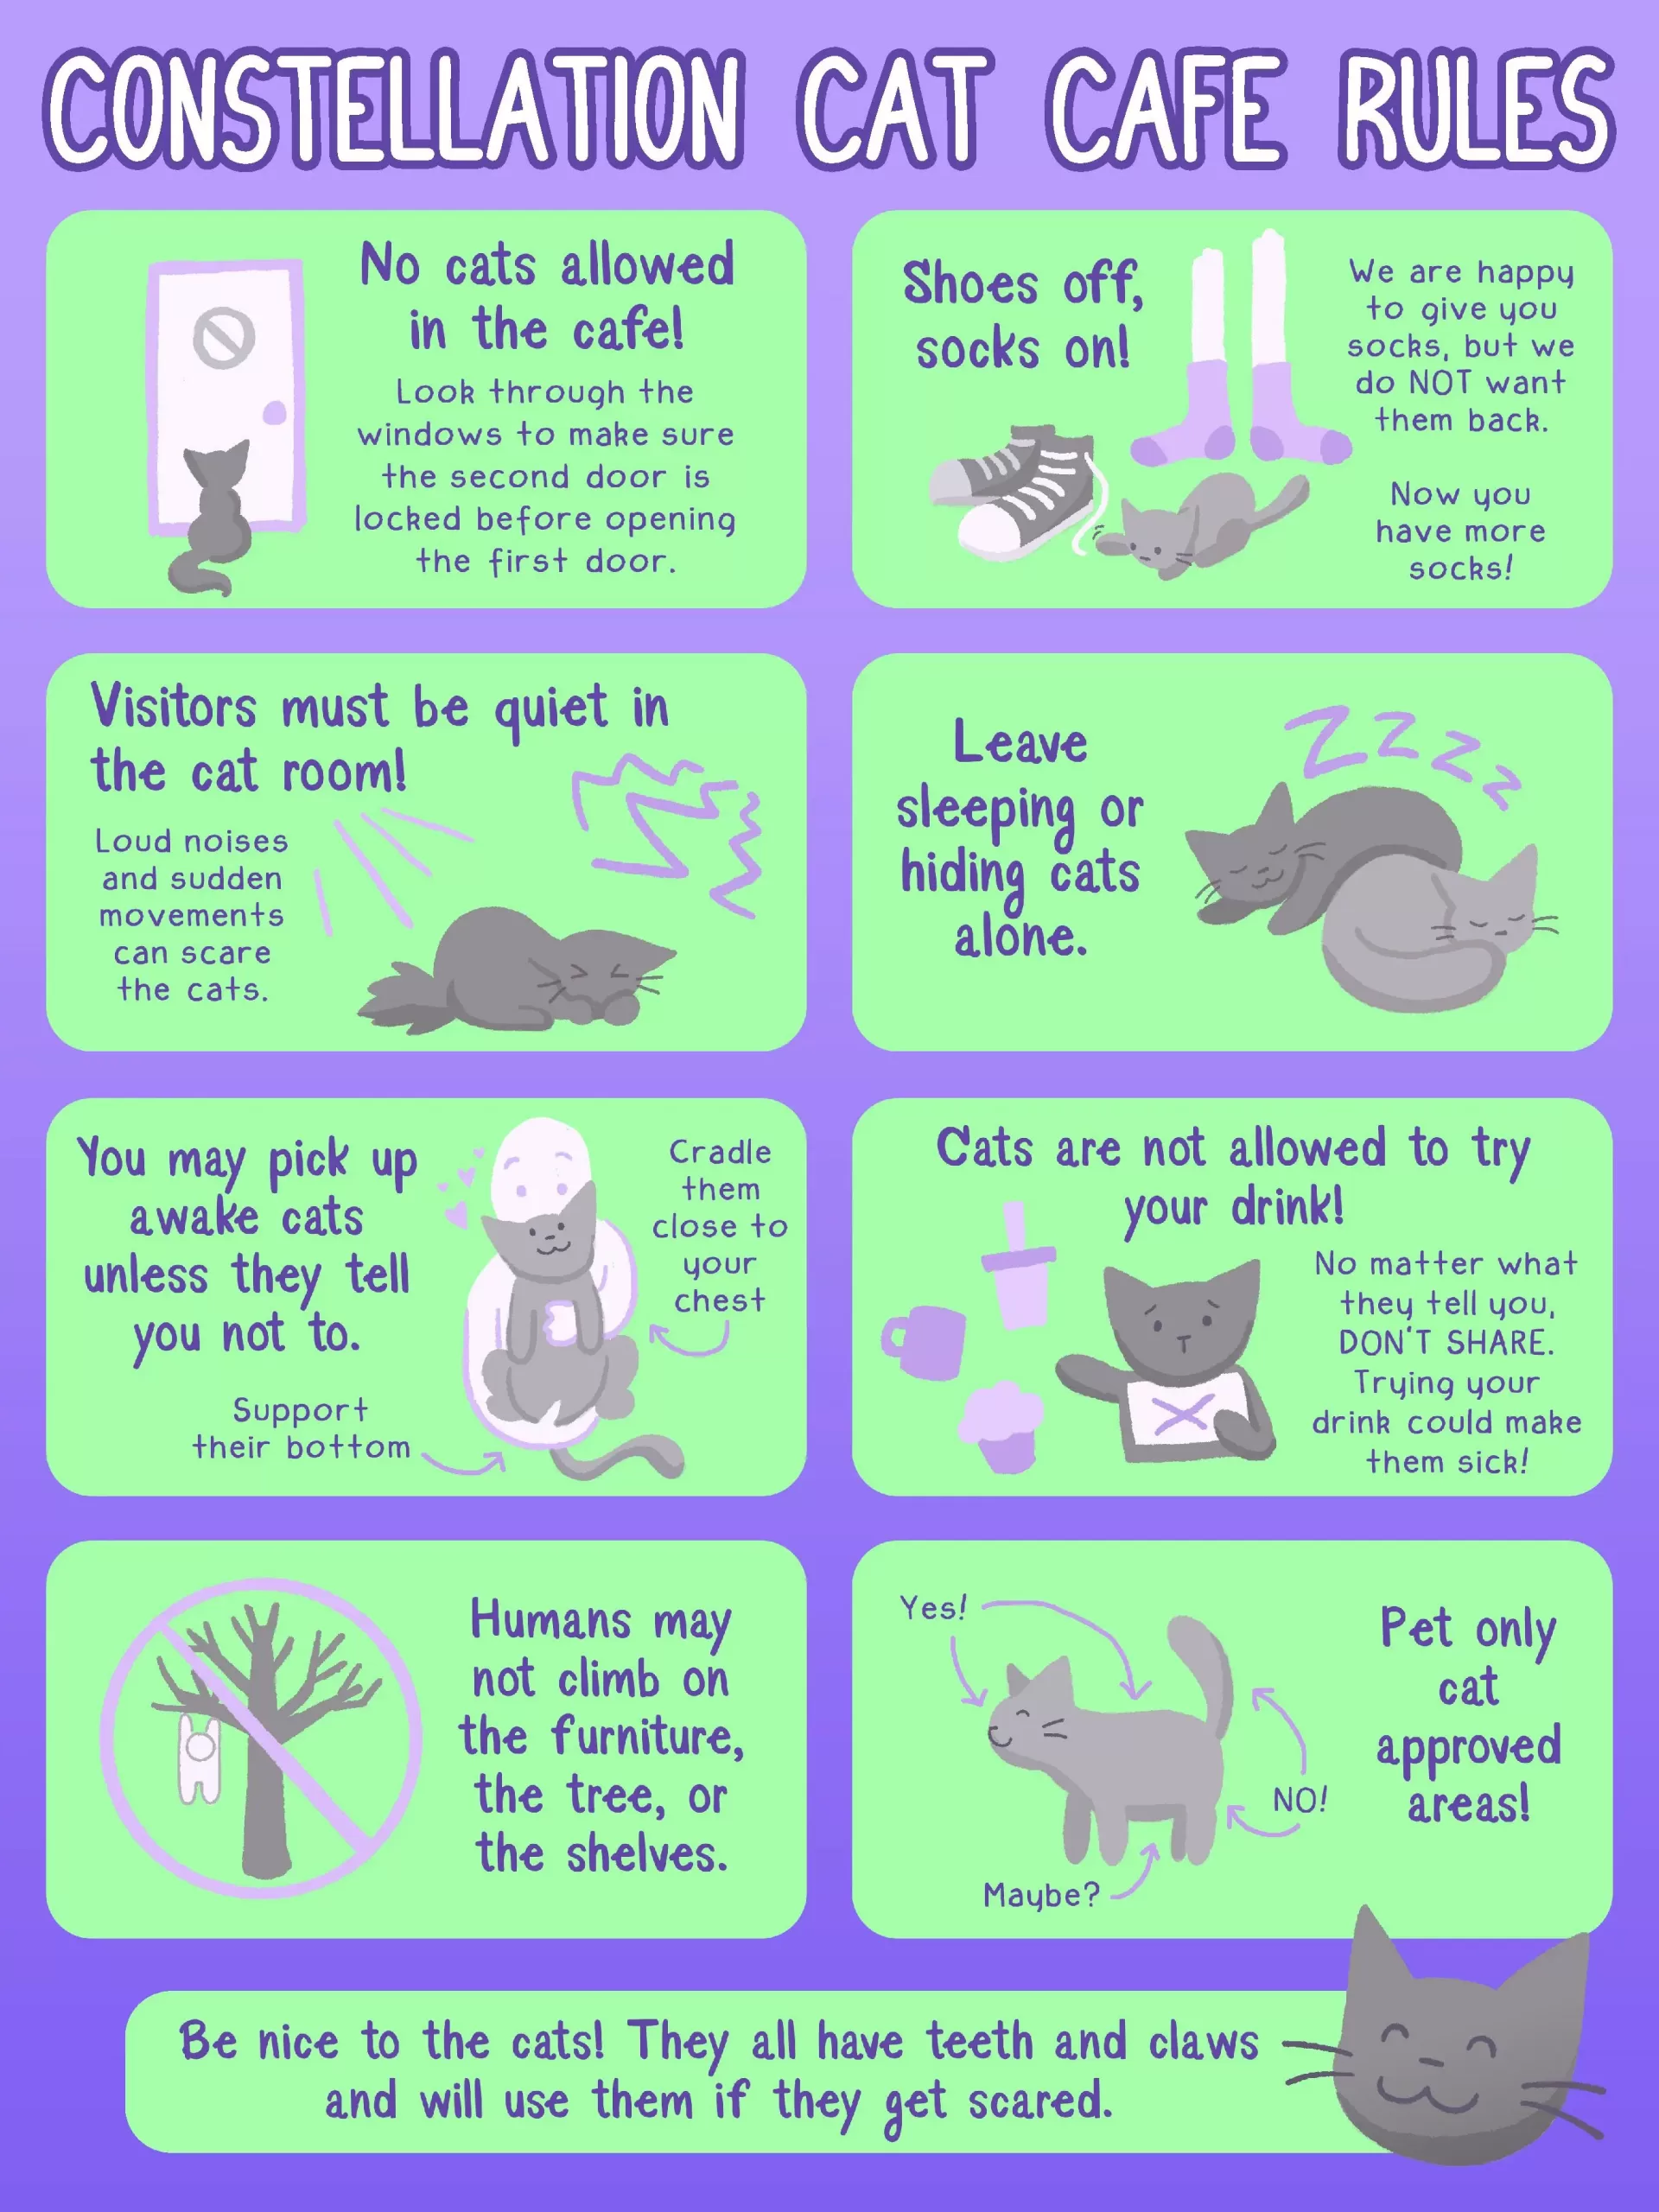 The Cat Room rules are as follows. Rule #1: No cats are allowed on the cafe side. Rule #2: When in the cat lock, take your shoes off and put socks on if needed. Rule #3: Visitors must stay quiet in the cat room. Rule #4: Leave sleeping or hiding cats alone. Rule #5: You may pick up awake unless they tell you not to. Rule #6: Please do not share your drink with any cat. Rule #7: Humans may not climb on the furniture, the tree, or the shelves. Rule #8: It is safe to pet cats on the head, and on their backs, but we do not advise petting them anywhere else. Most importantly, be nice to the cats. They have claws and teeth and will use them if they get scared.